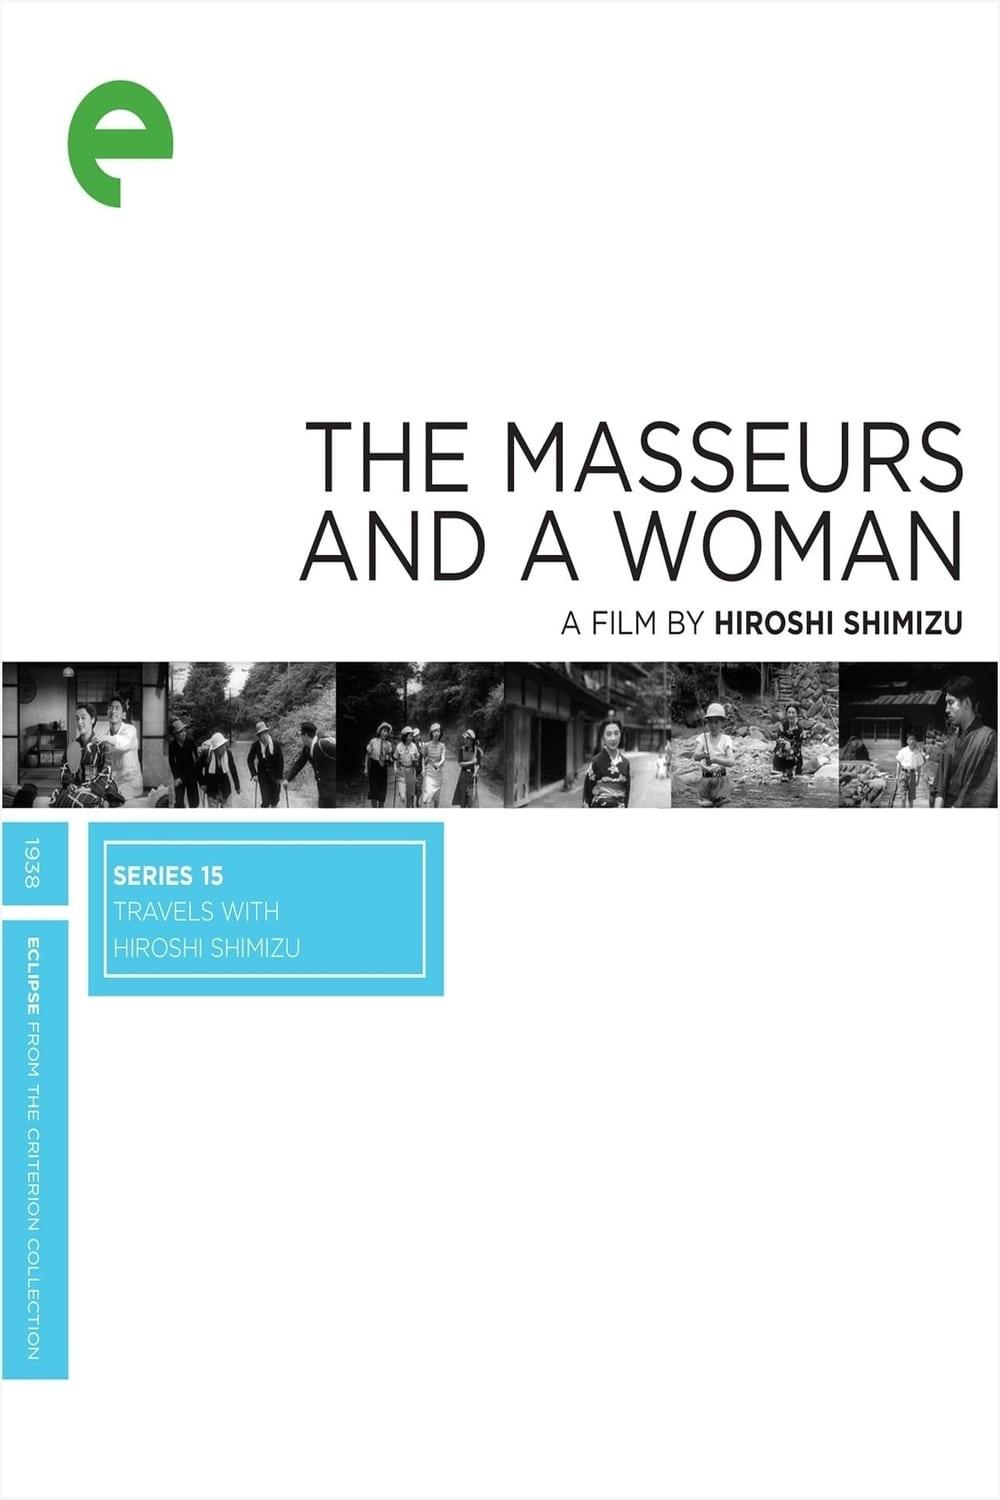 The Masseurs and a Woman poster